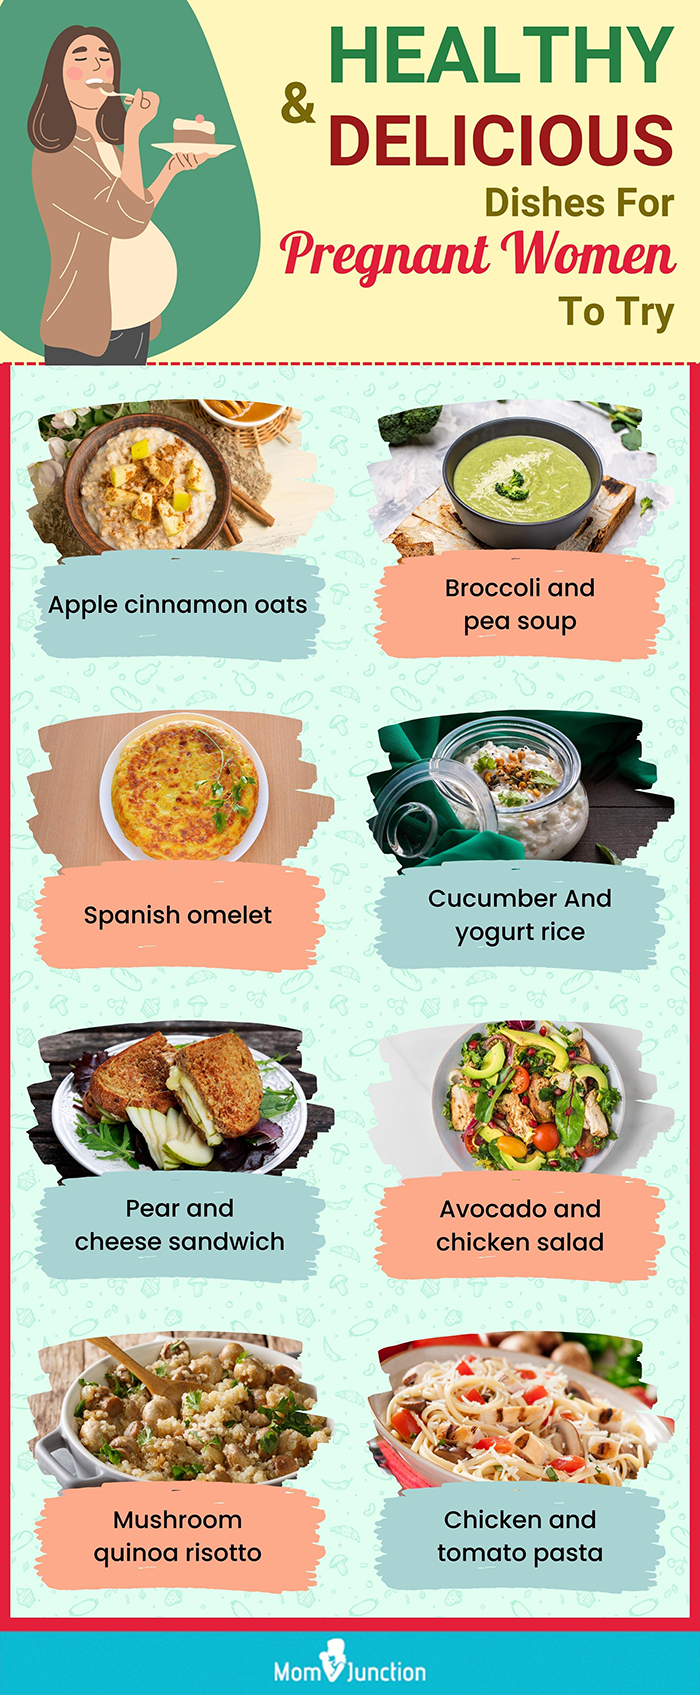 healthy and delicious dishes for pregnant women to try (infographic)